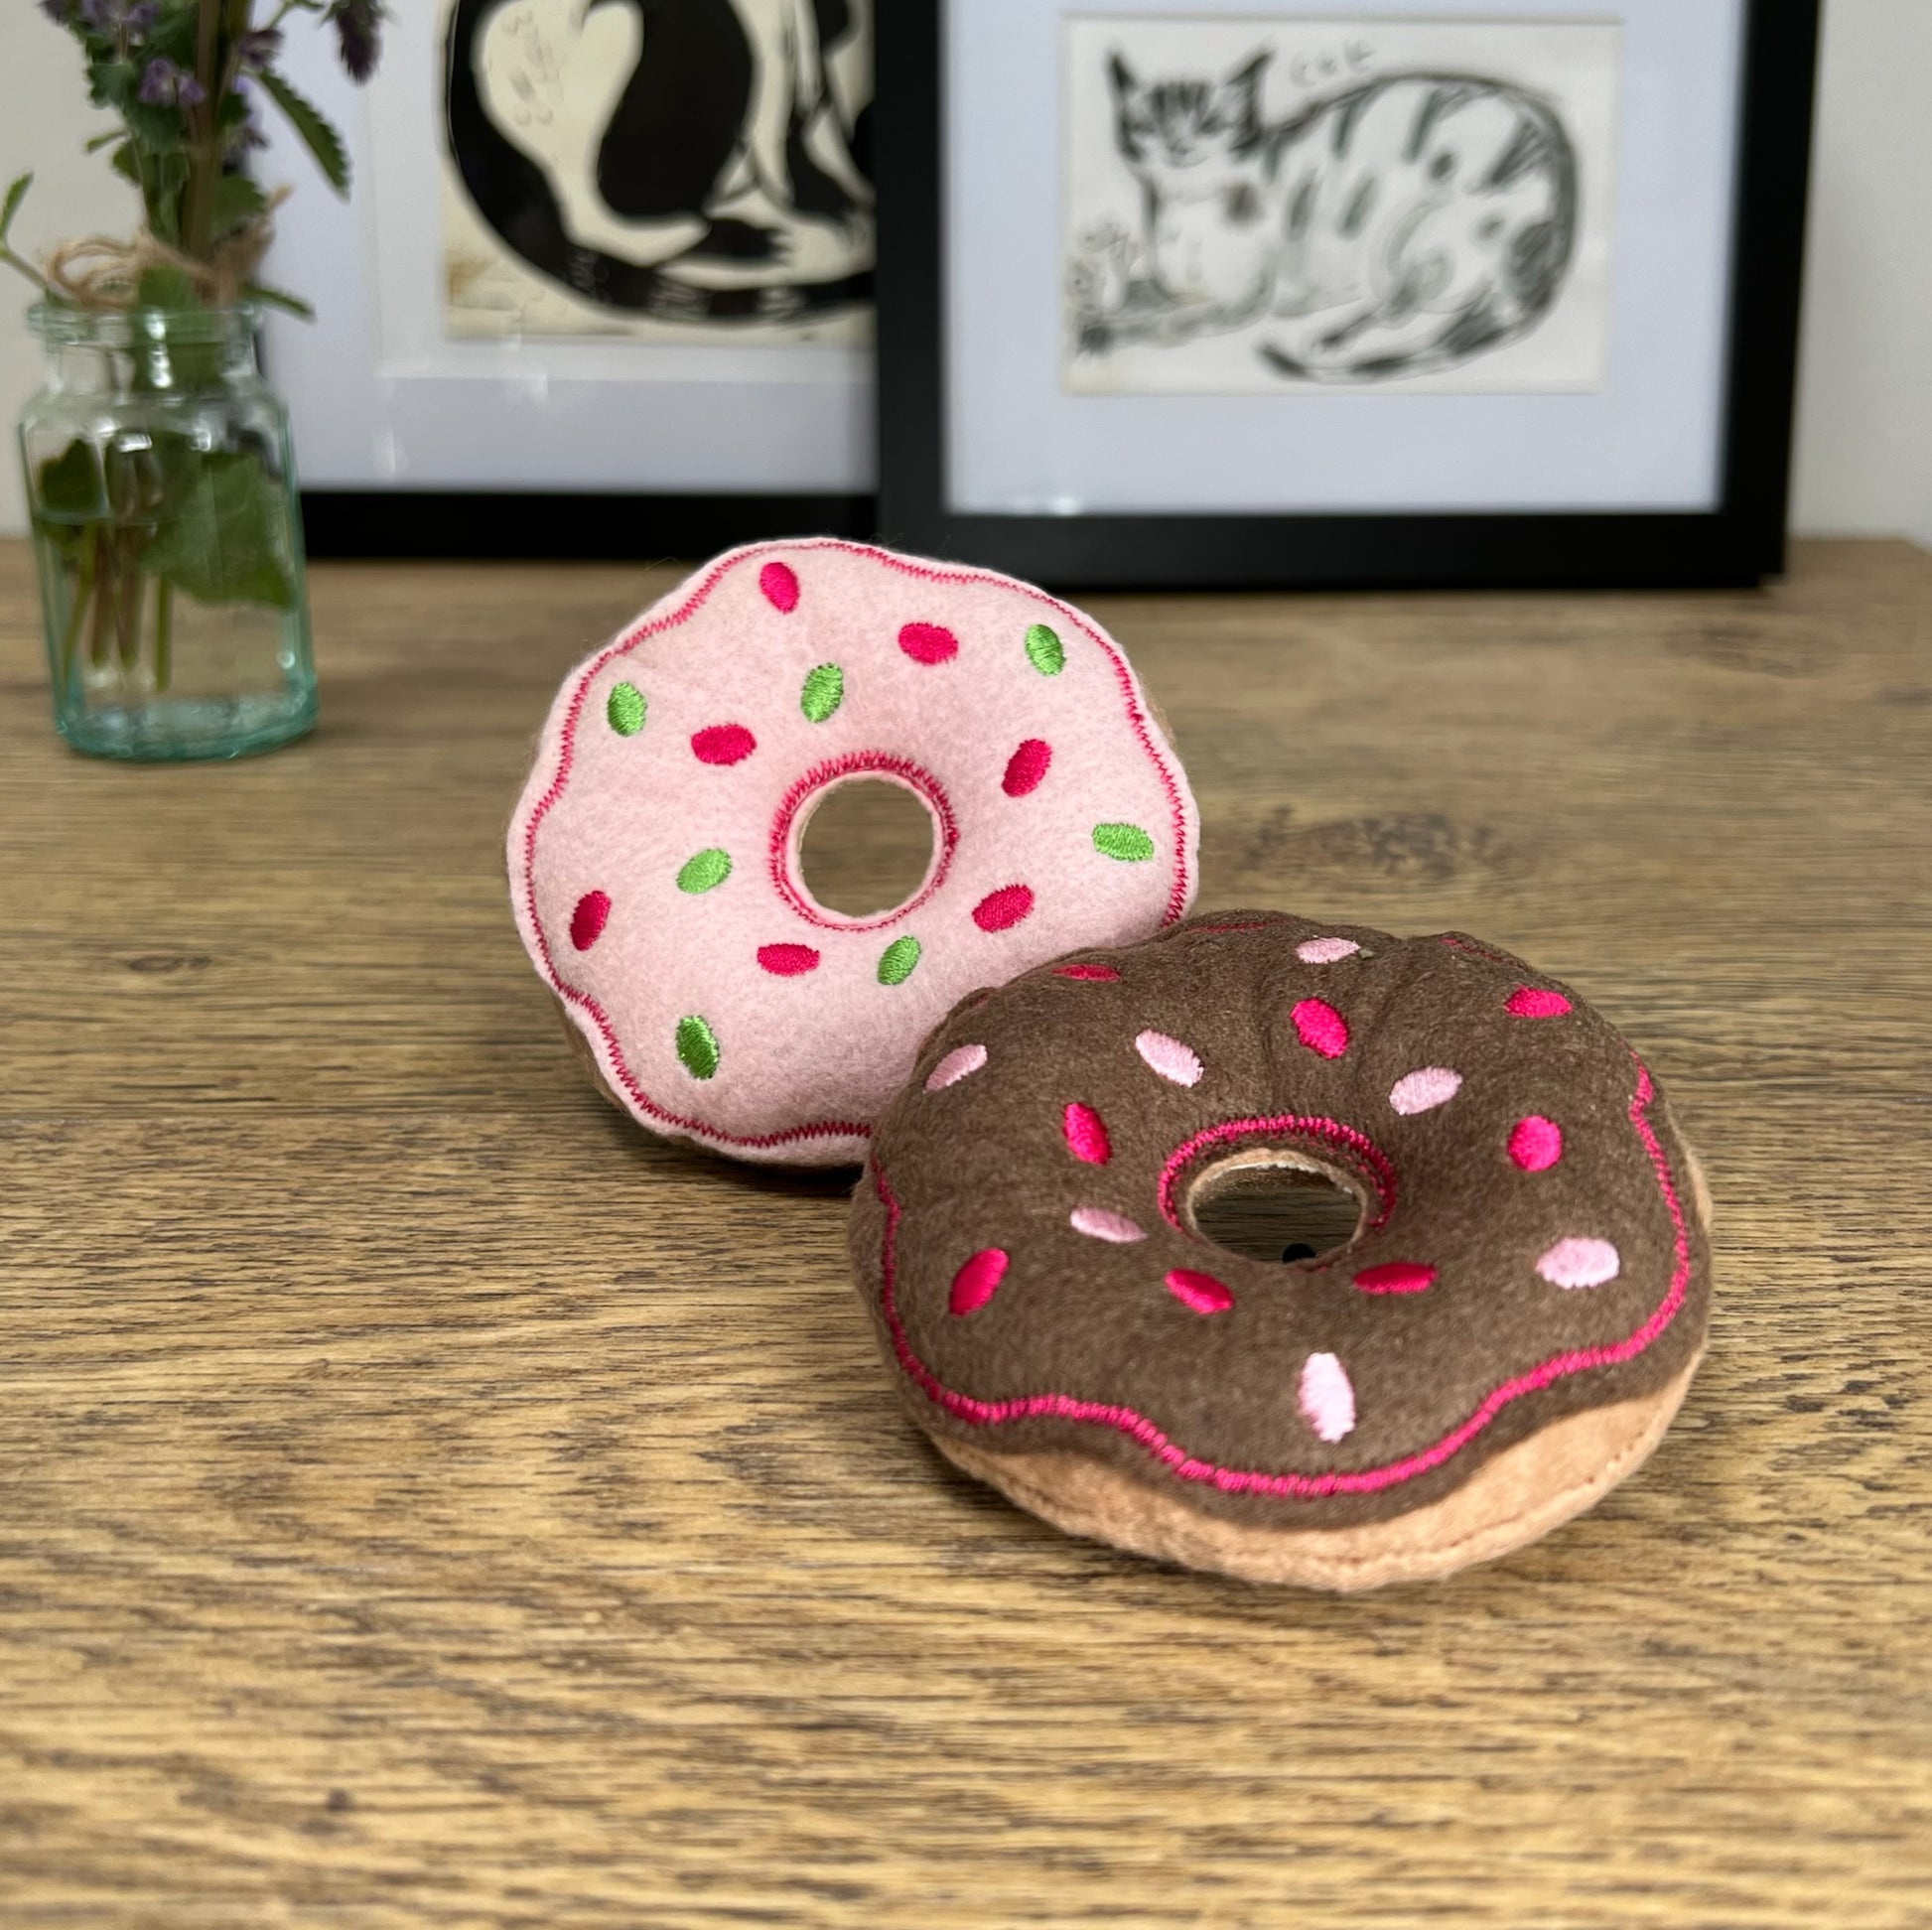 Freak Meowt Luxury Cat Toys, Gifts for Cats Doughnuts, Handmade in Wales, Best cat toys